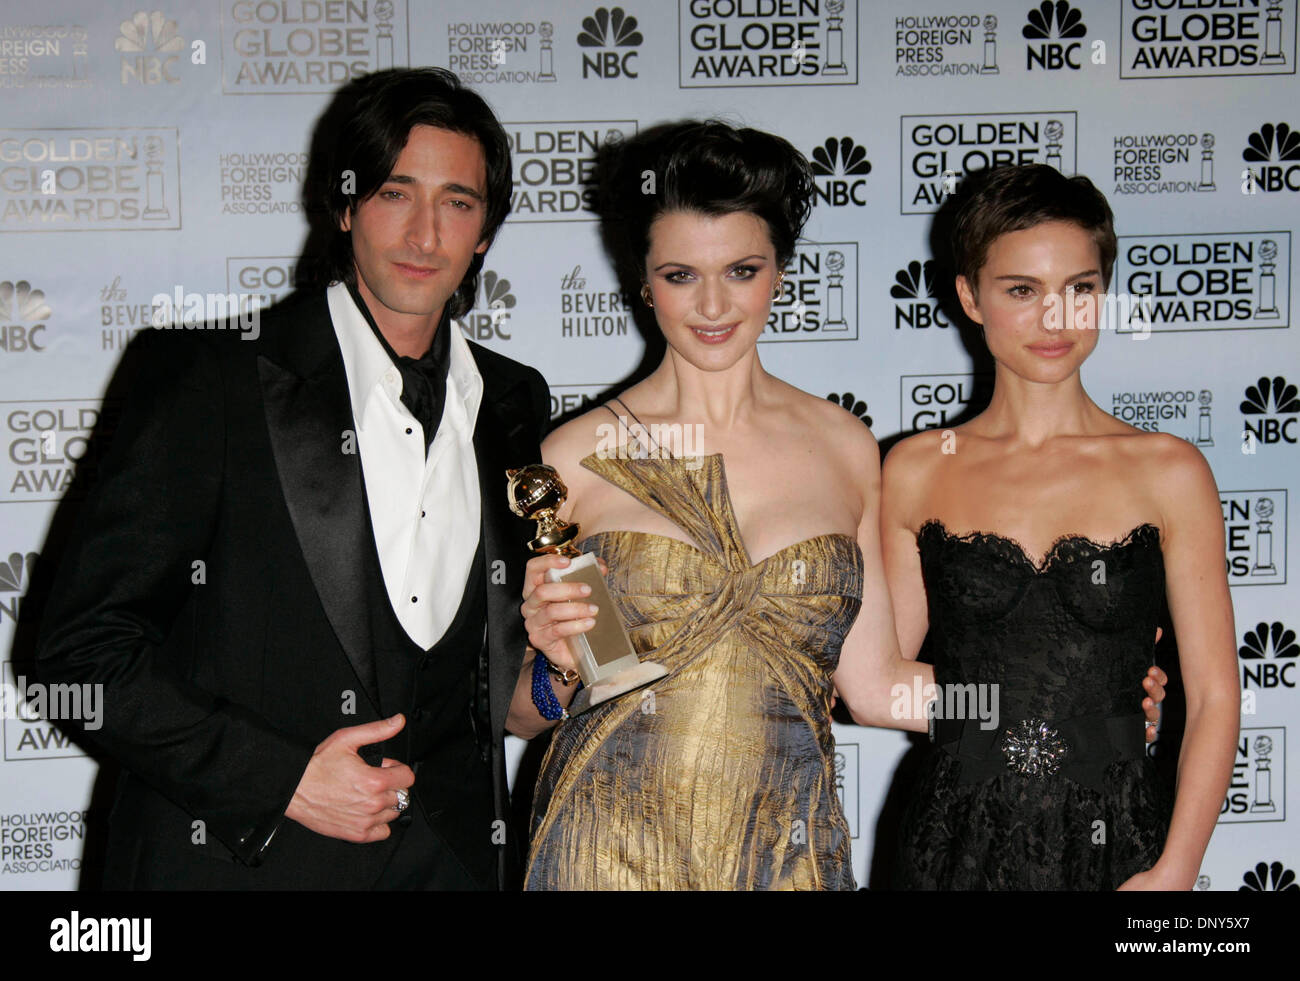 Jan 16, 2006; Beverly Hills, CA, USA; Golden Globes 2006: Actor ADRIEN  BRODY with RACHEL WEISZ and NATALIE PORTMAN in the press room at the 63rd  Annual Golden Globe Awards held at